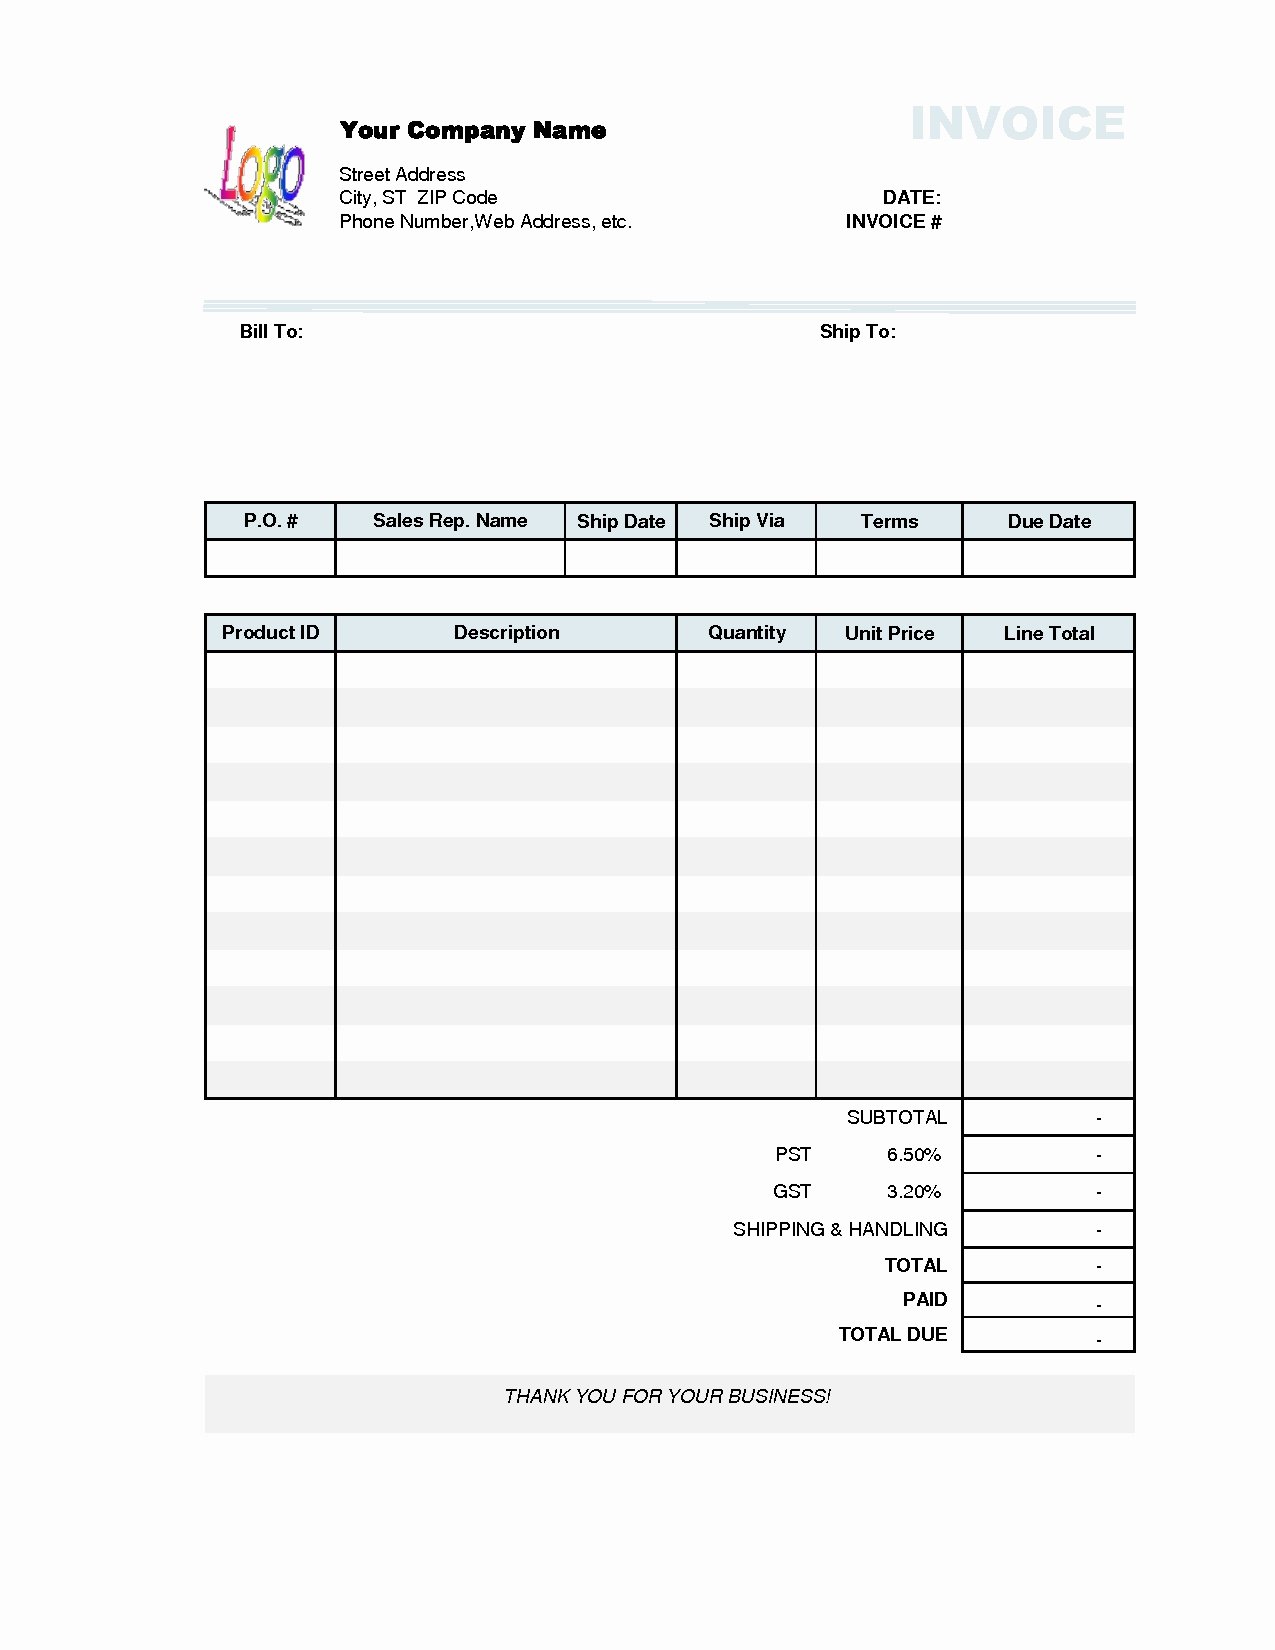 Invoice Spreadsheet Template Free Best Of Simple Invoice Templates Invitation Template